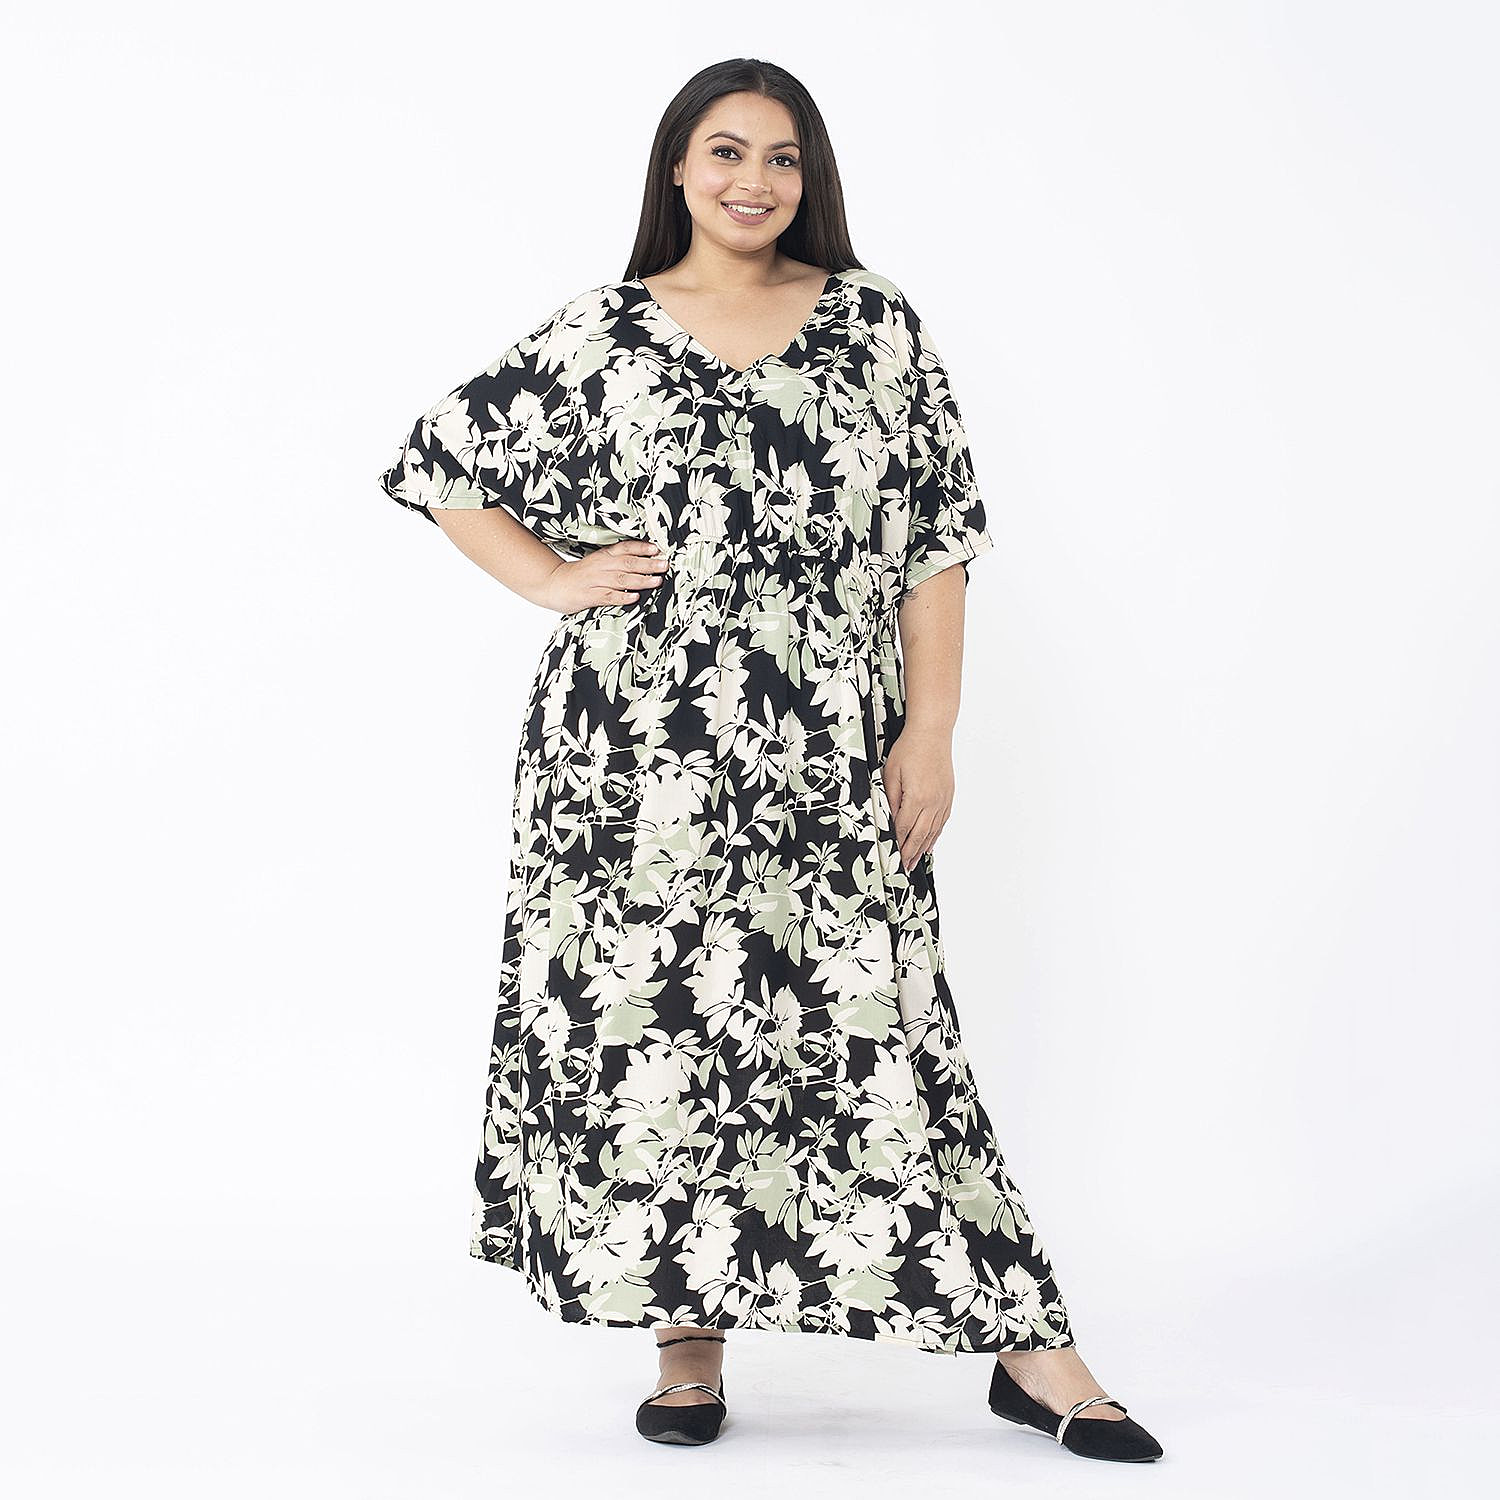 Tamsy Floral Printed Dress (One Size Curve) - Black